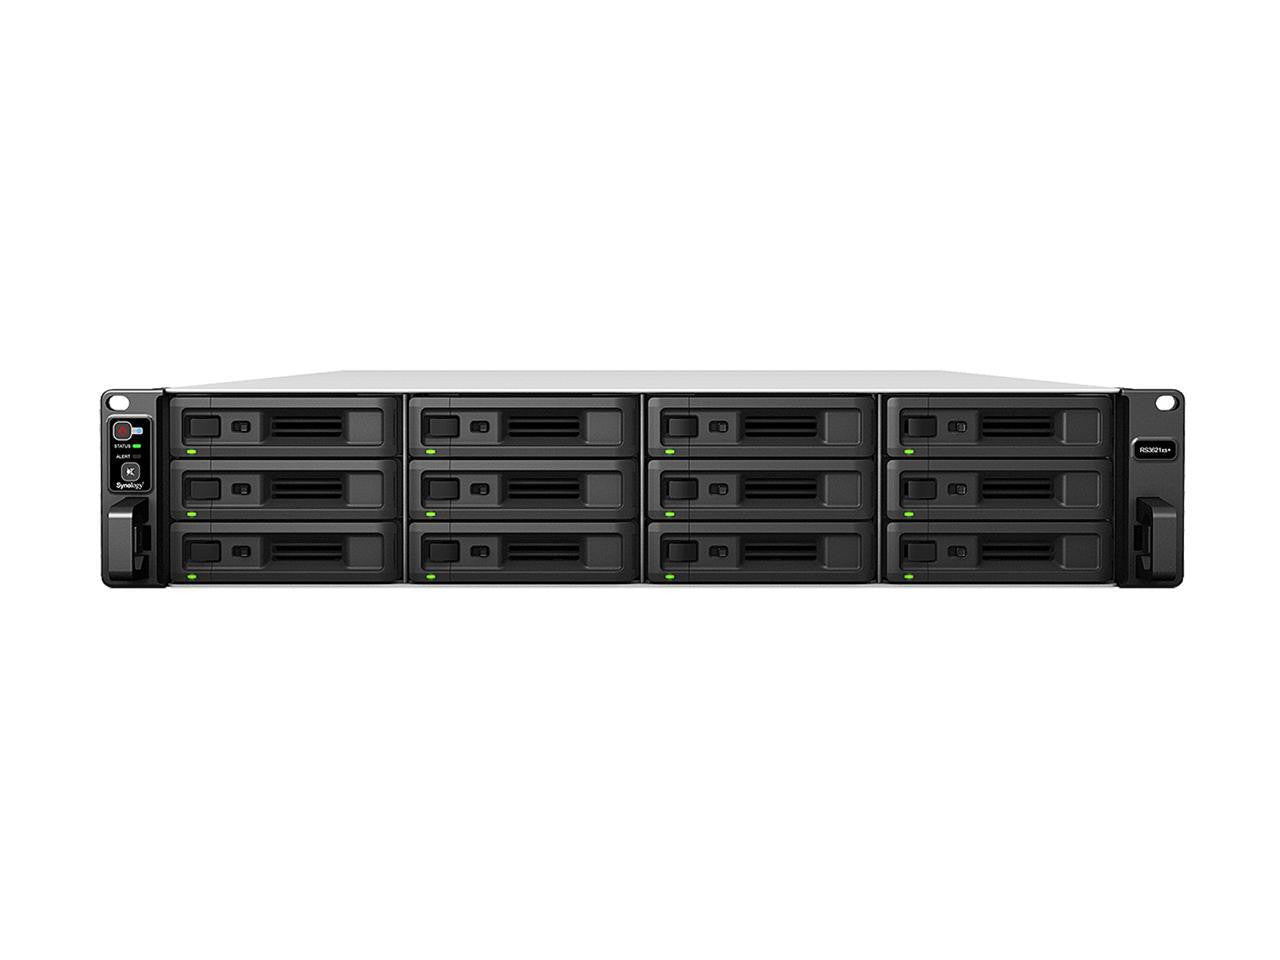 RS3621xs+ 12-BAY RackStation with 8GB RAM and 11.52TB (12 x 960GB) of Synology Enterprise Solid State Drives